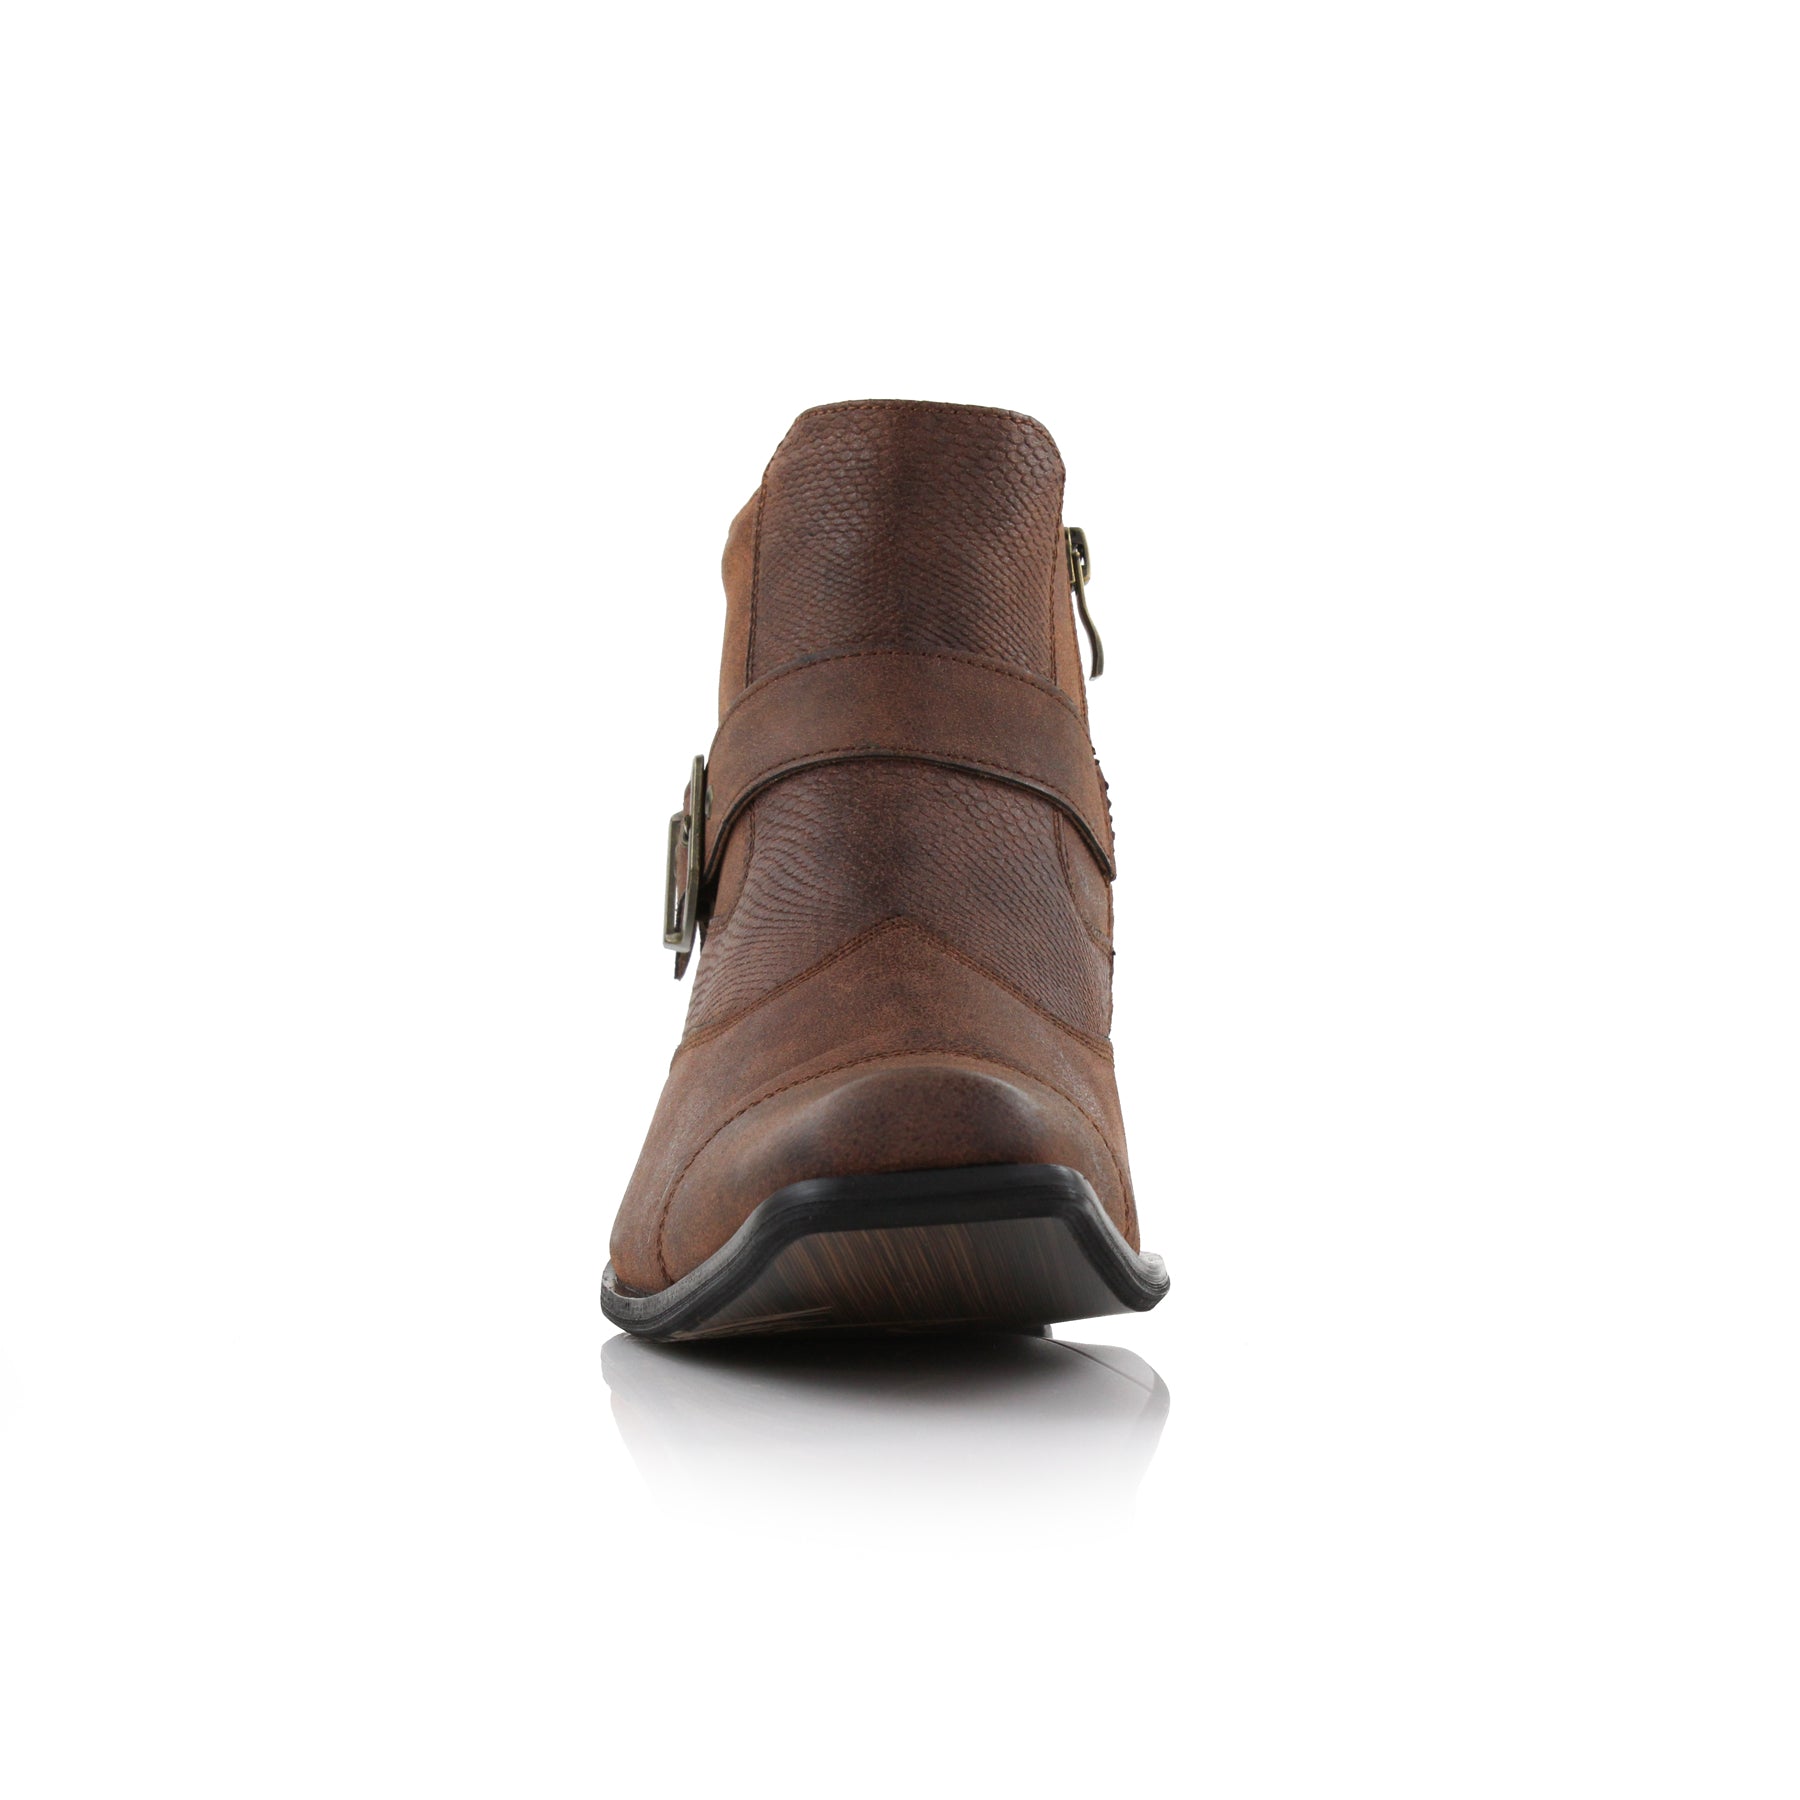 Snake Hide Embossed Cowboy Boots | Alejandro by Ferro Aldo | Conal Footwear | Front Angle View